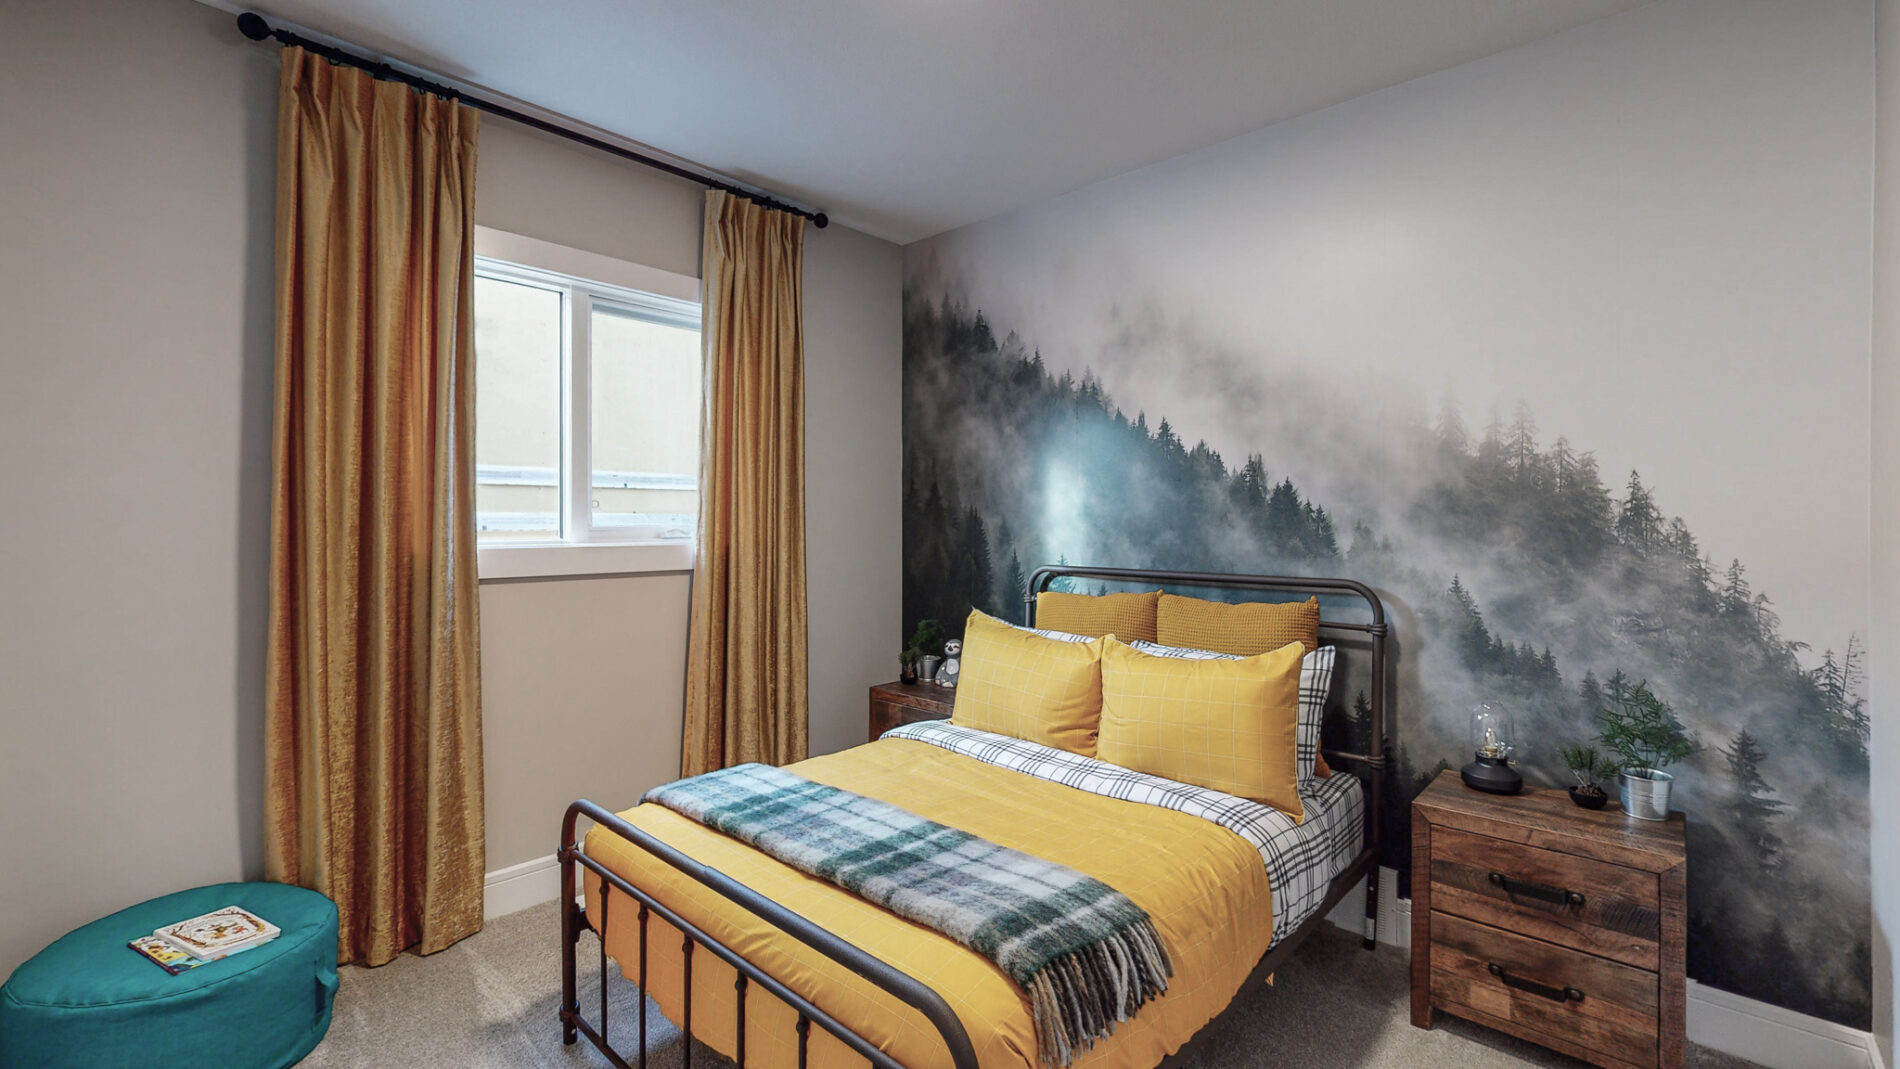 A natural mountain mural behind the bed of a secondary bedroom with yellow bedding and curtains